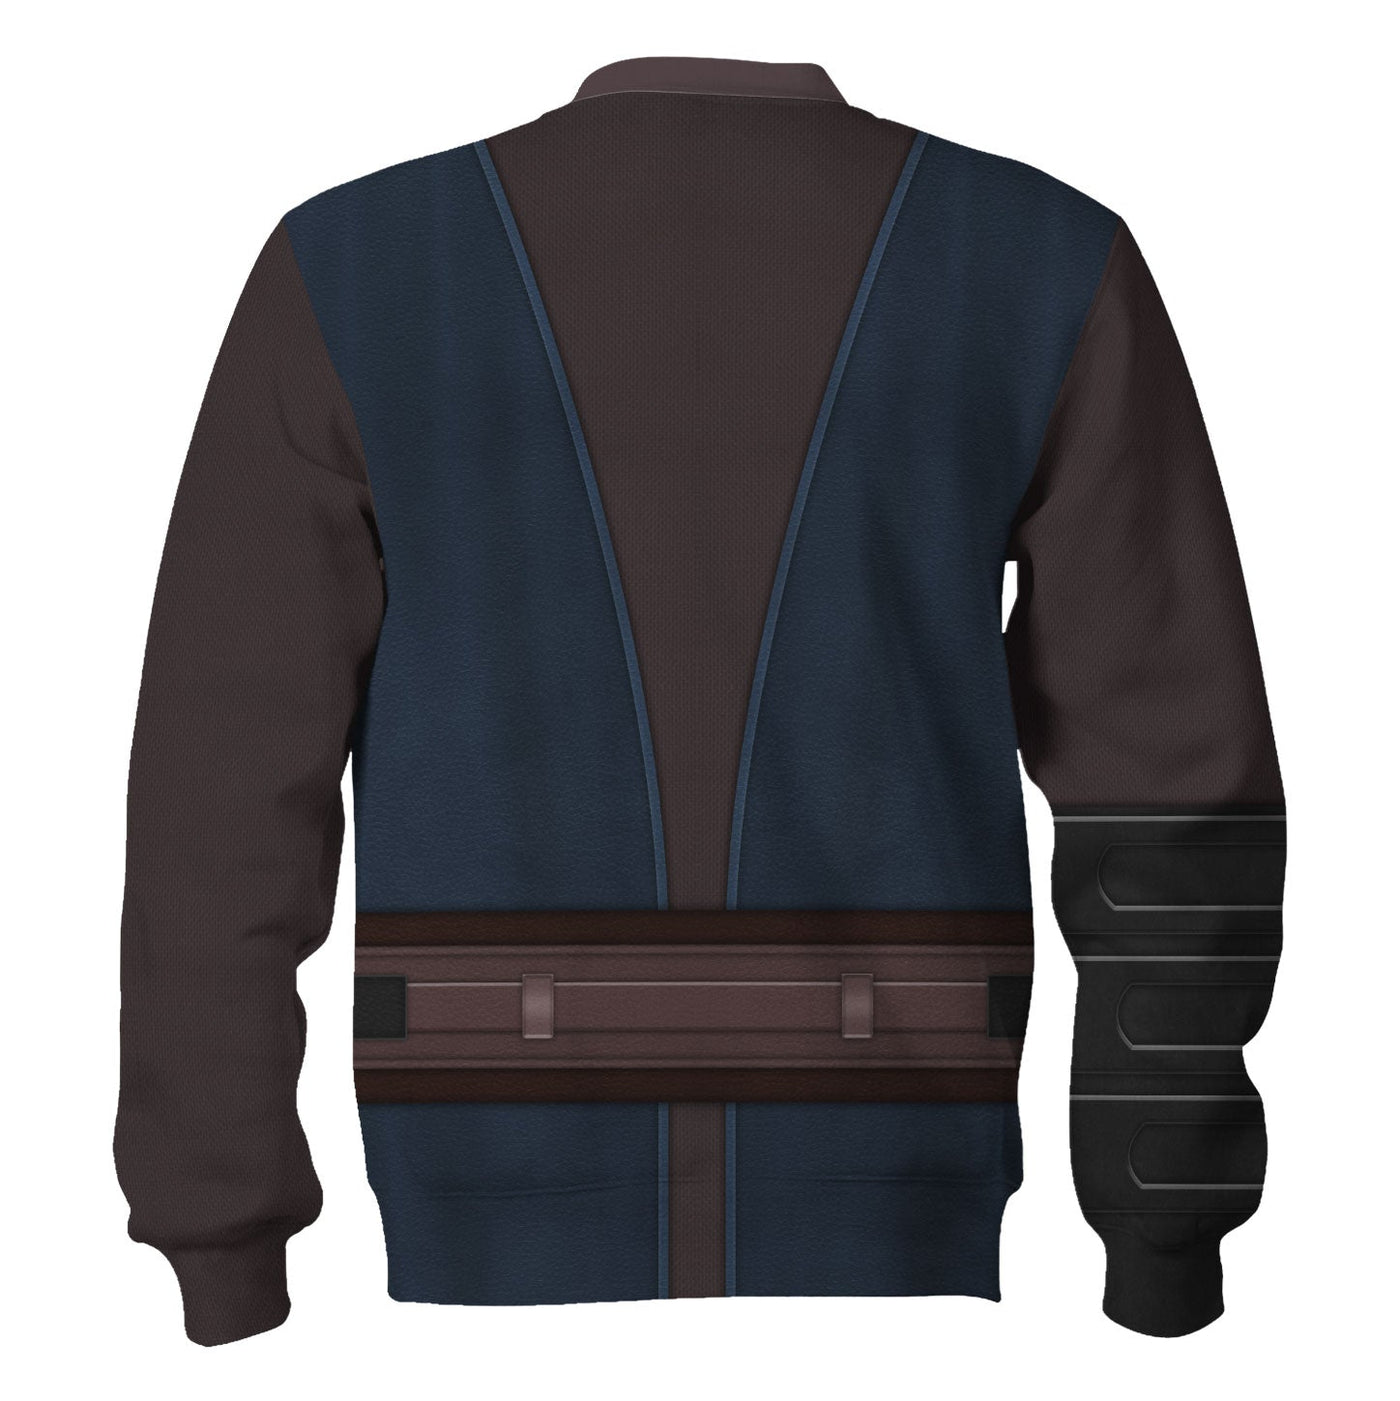 Star Wars Anakin Skywalker's Jedi Robes Costume - Sweater - Ugly Christmas Sweater